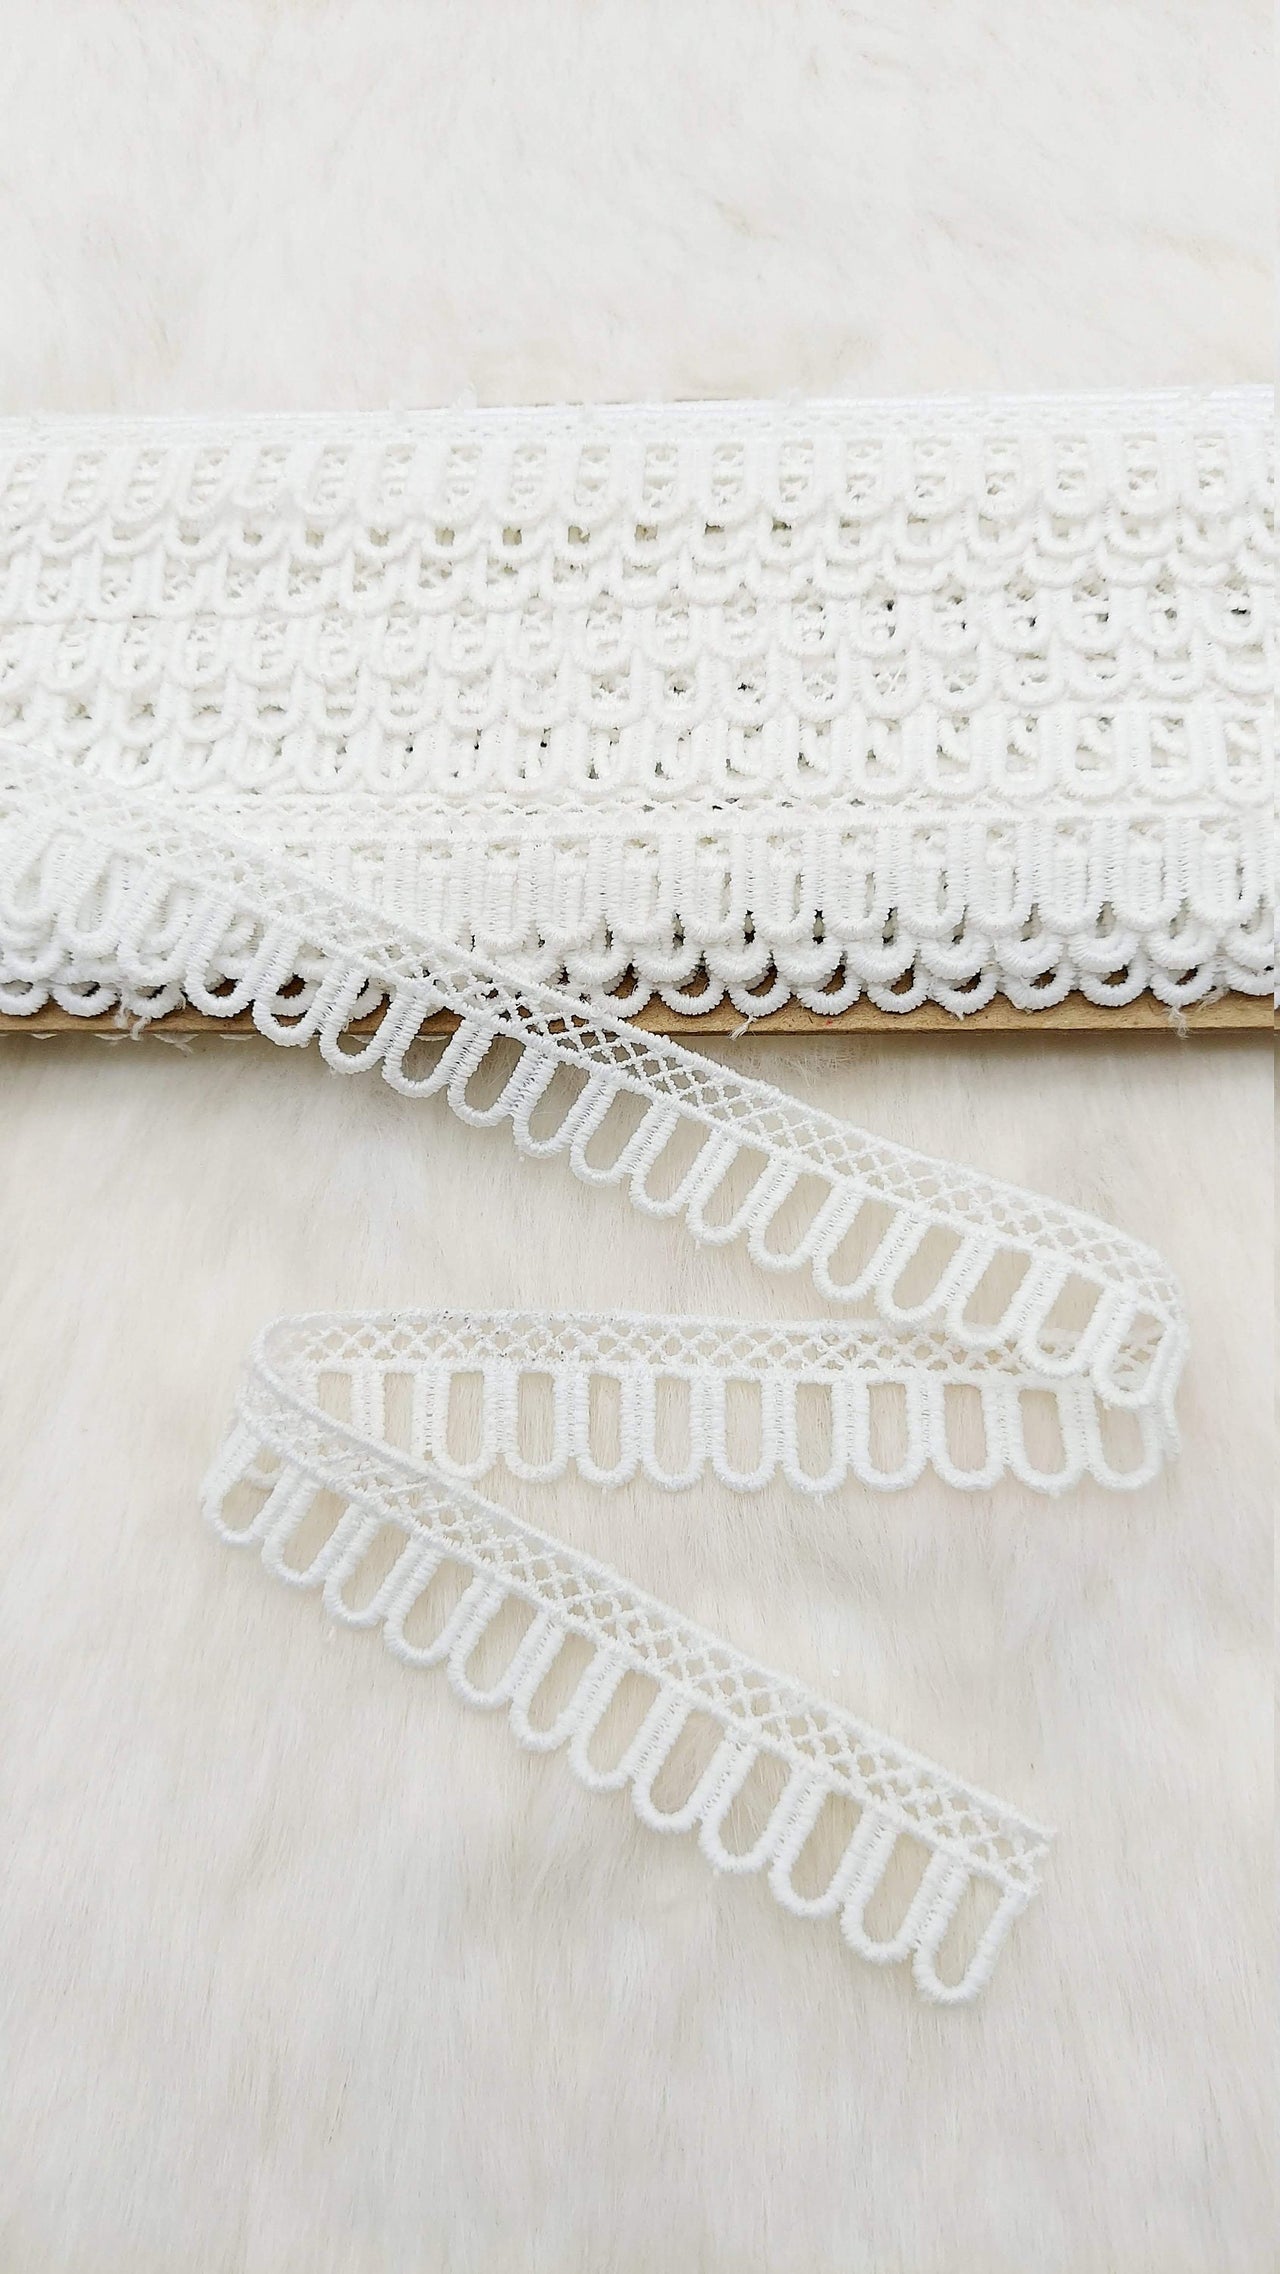 9 Yards White Embroidery Cotton Lace Trim, Approx. 20mm Wide, Fringe Trim